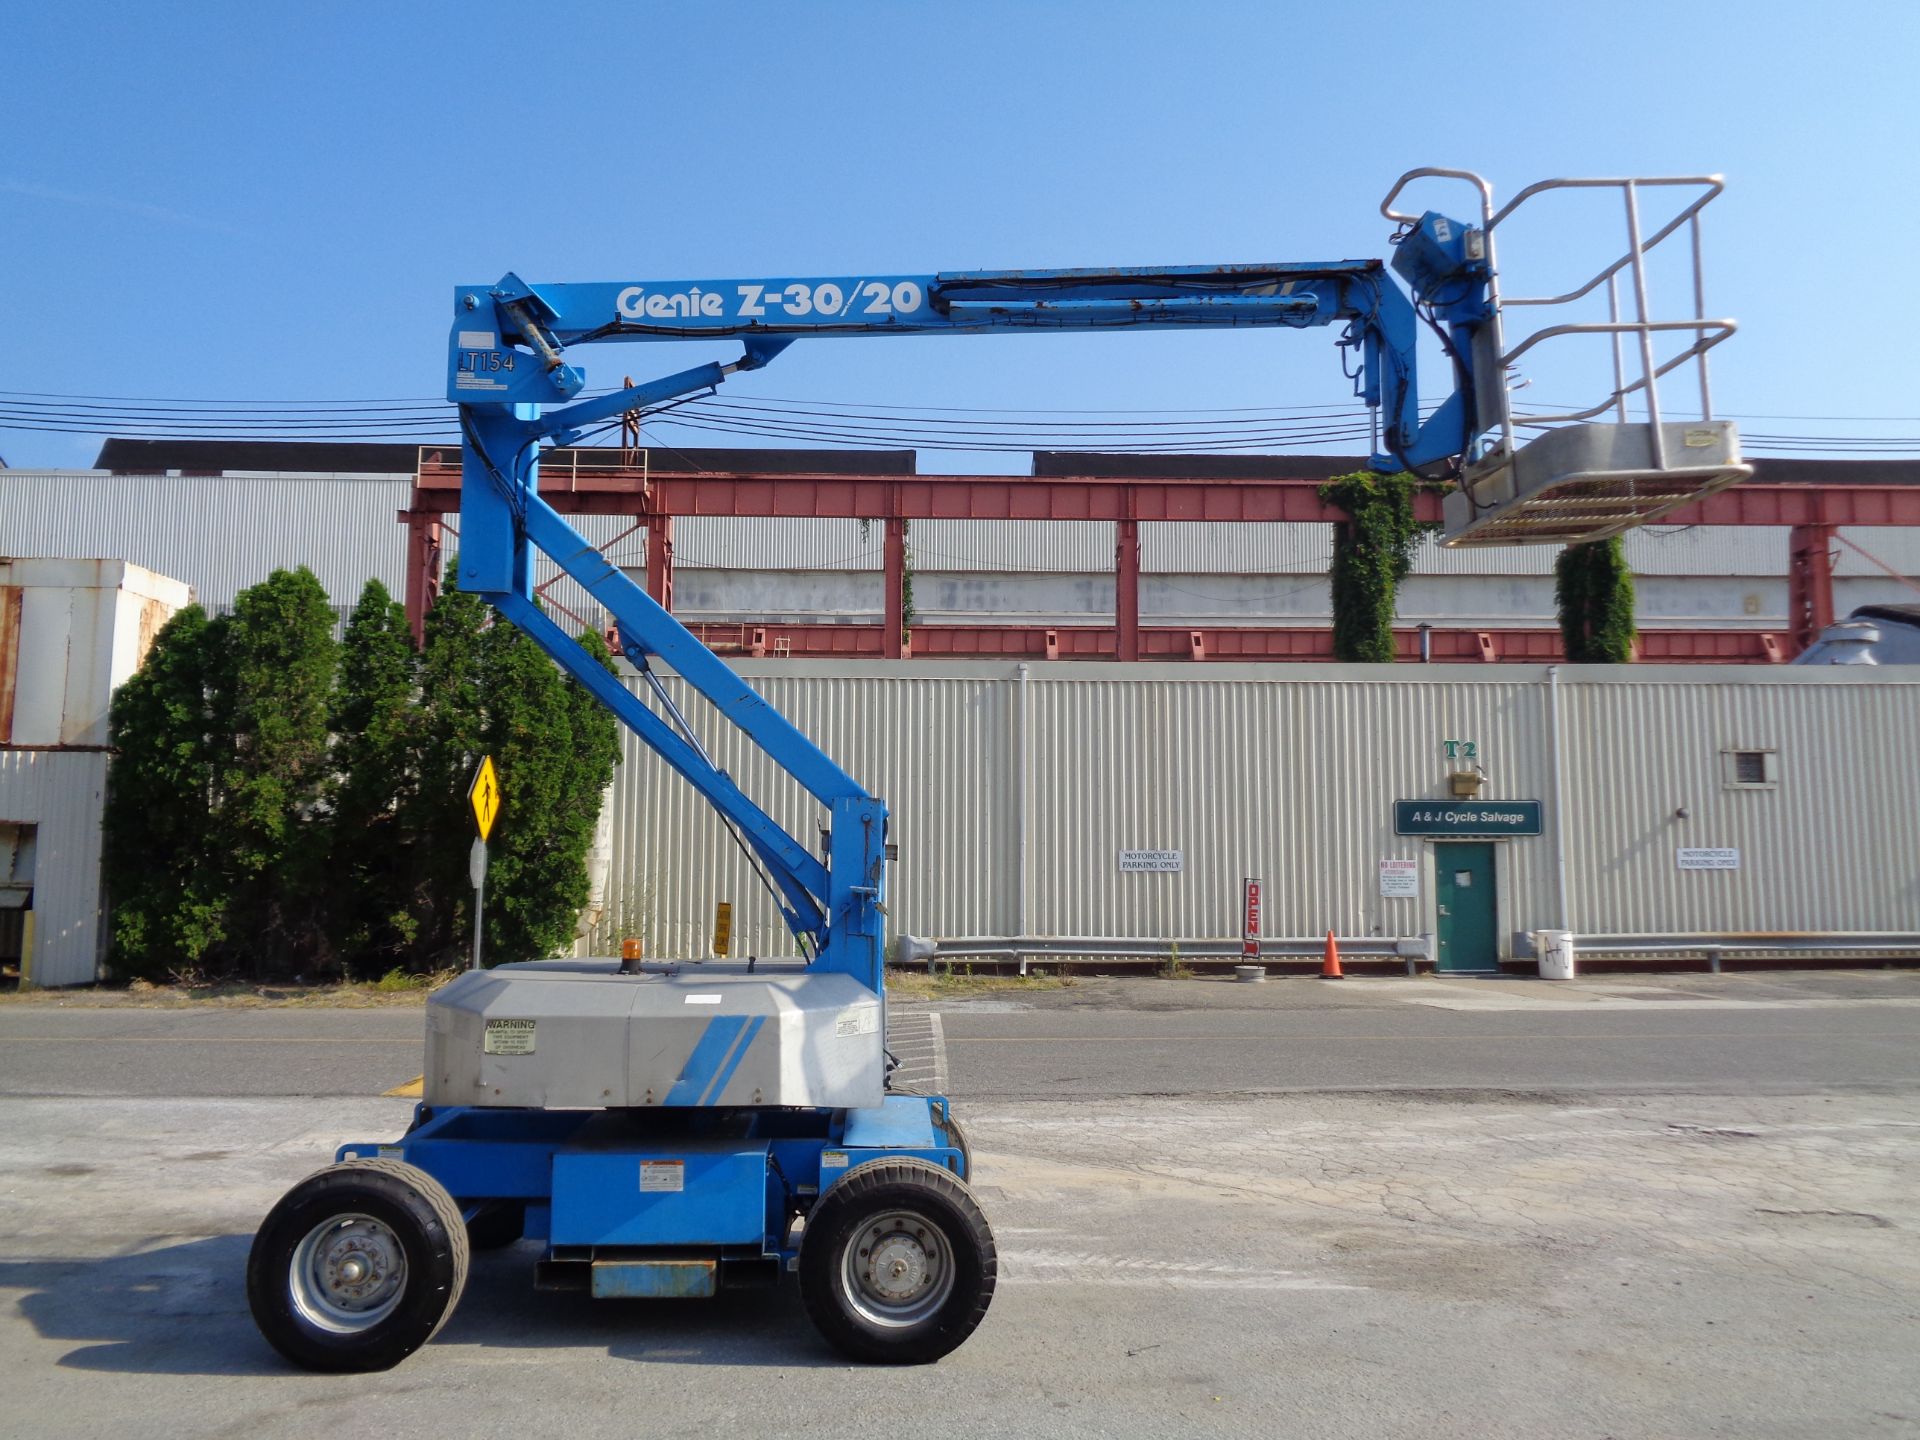 Genie Z30/20 Electric Articulating Boom Lift - 30FT Height